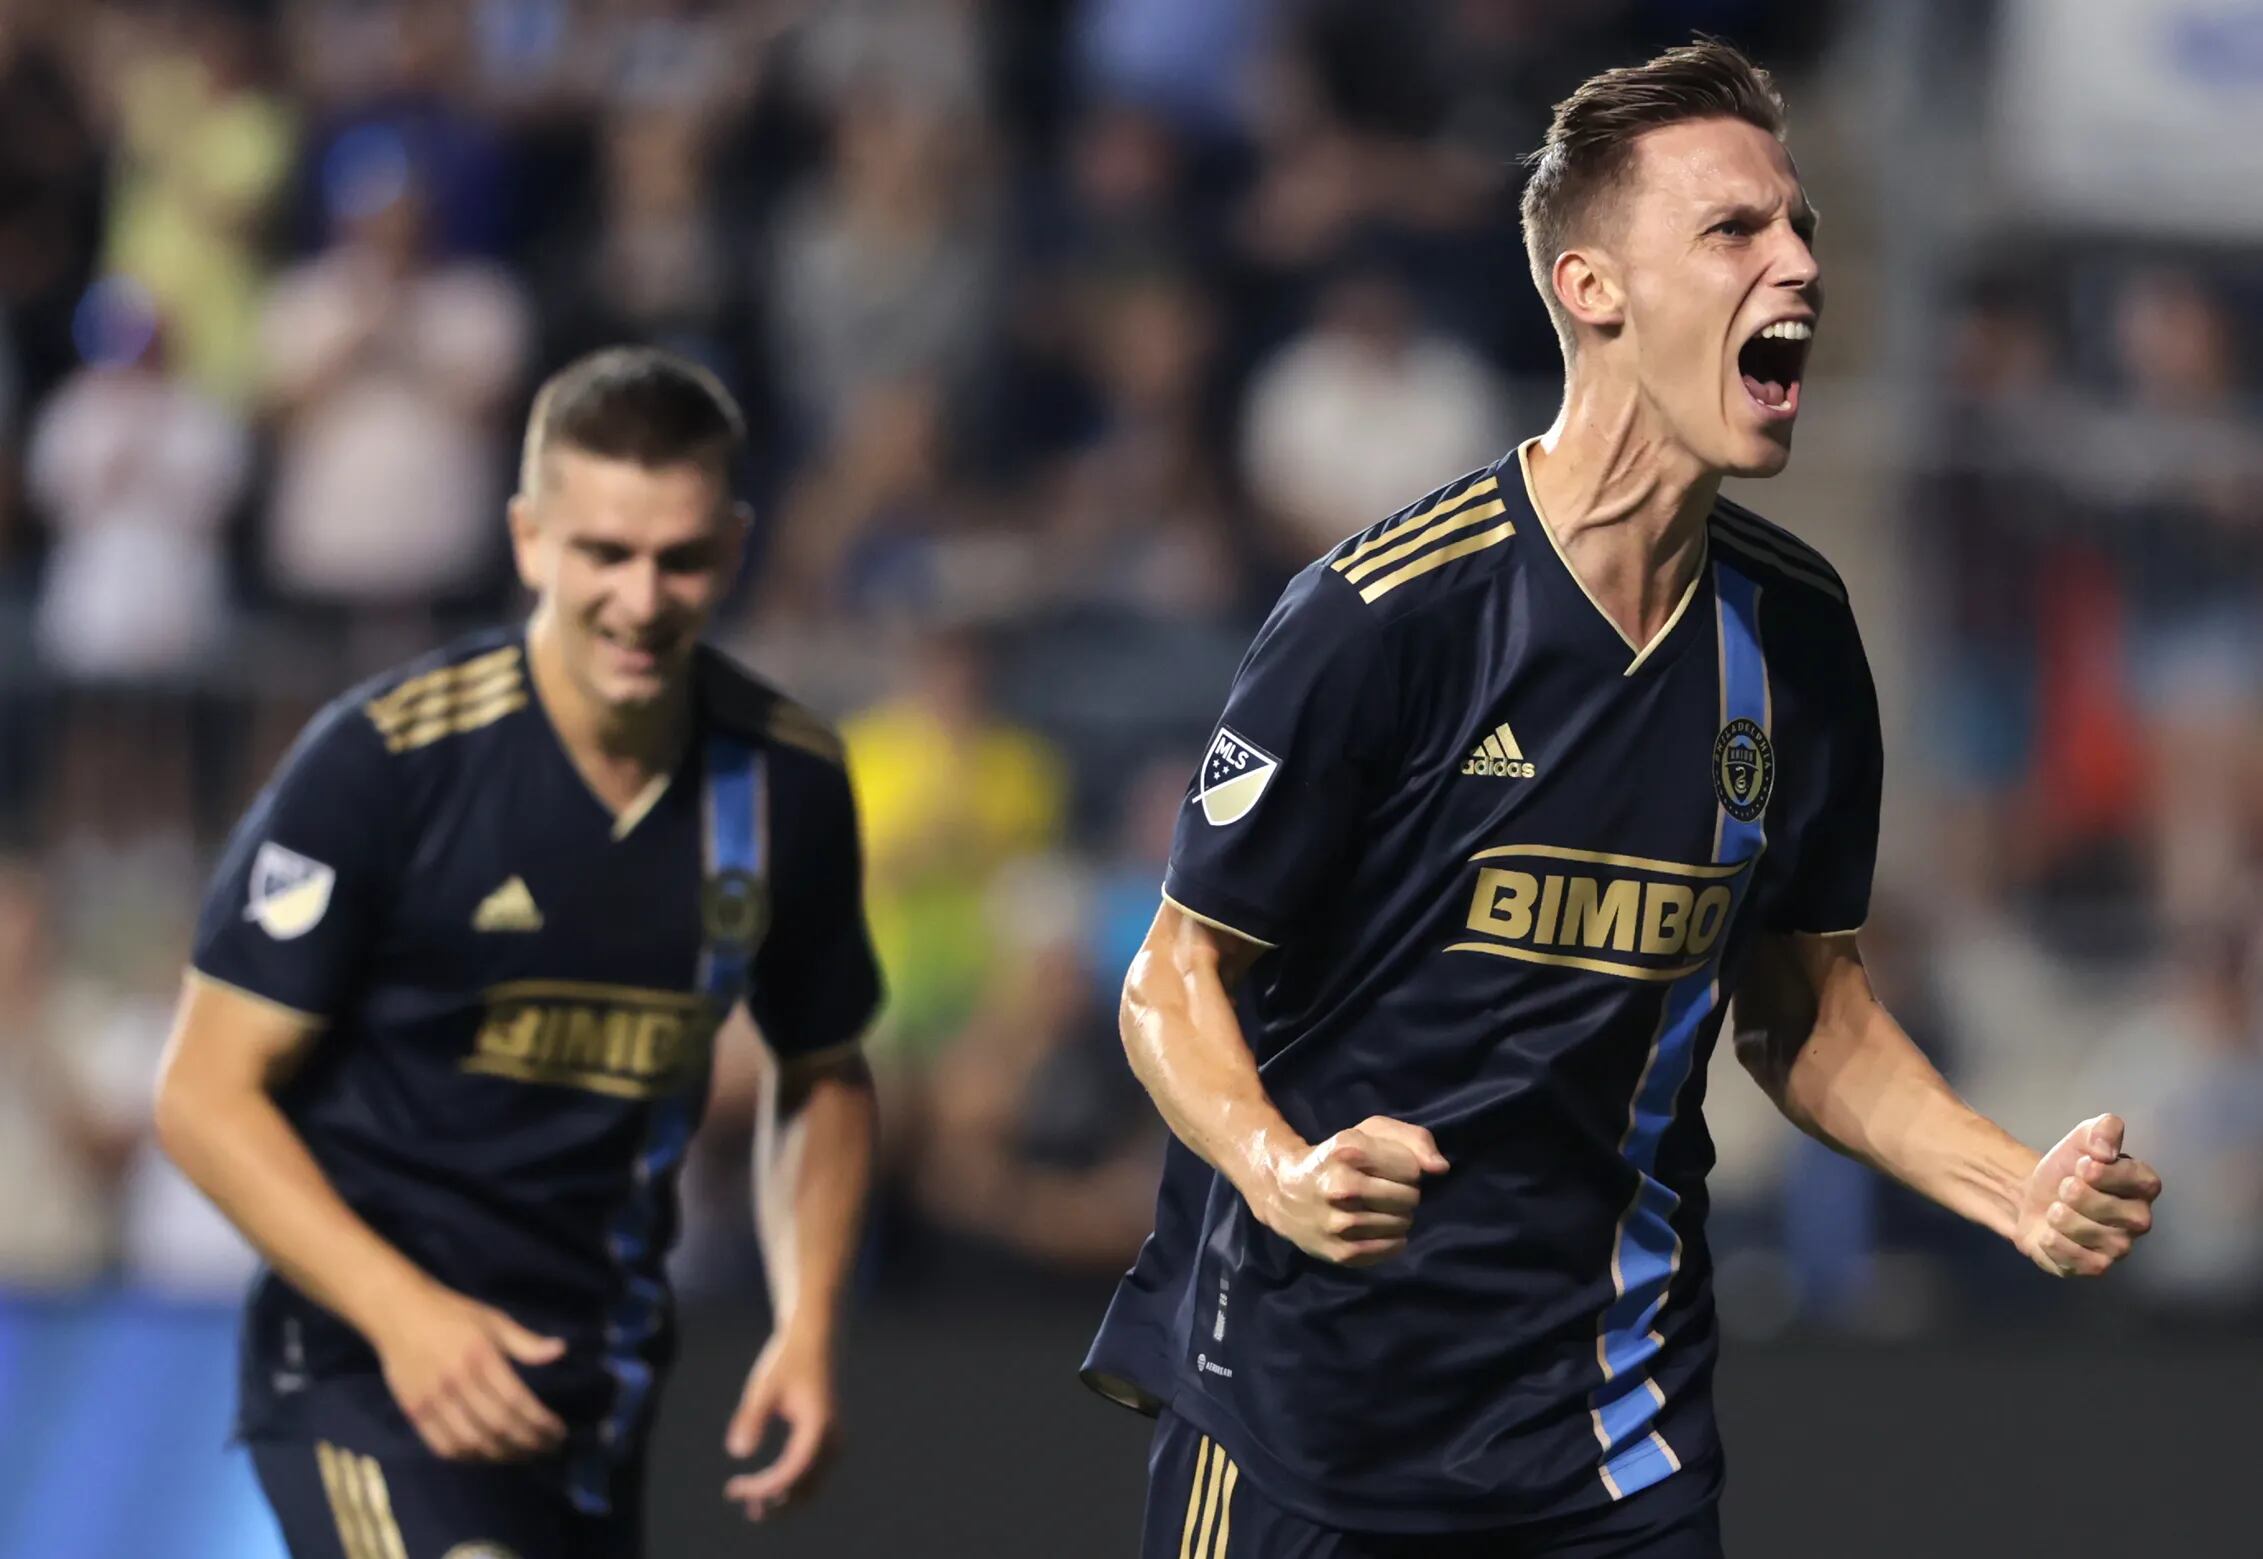 Philadelphia Union defender Jack Elliott signed to multi-year contract  extension - Brotherly Game